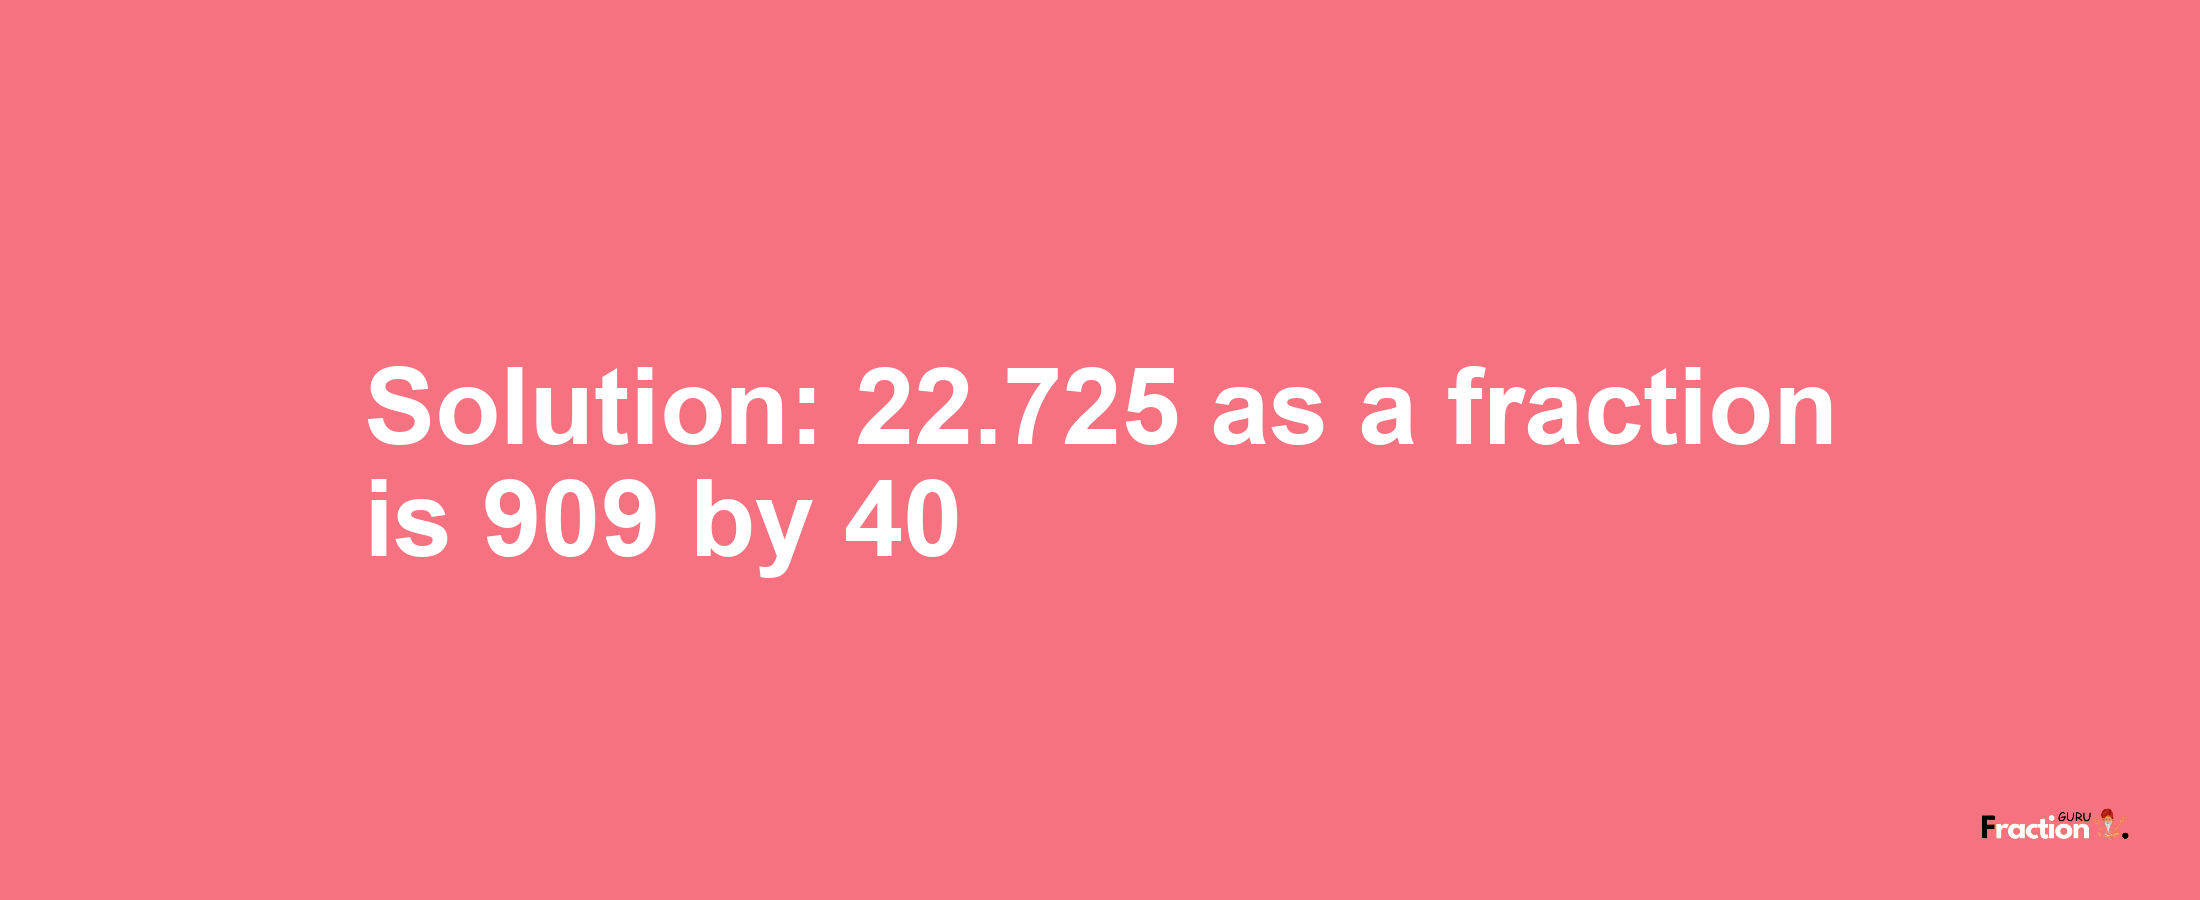 Solution:22.725 as a fraction is 909/40